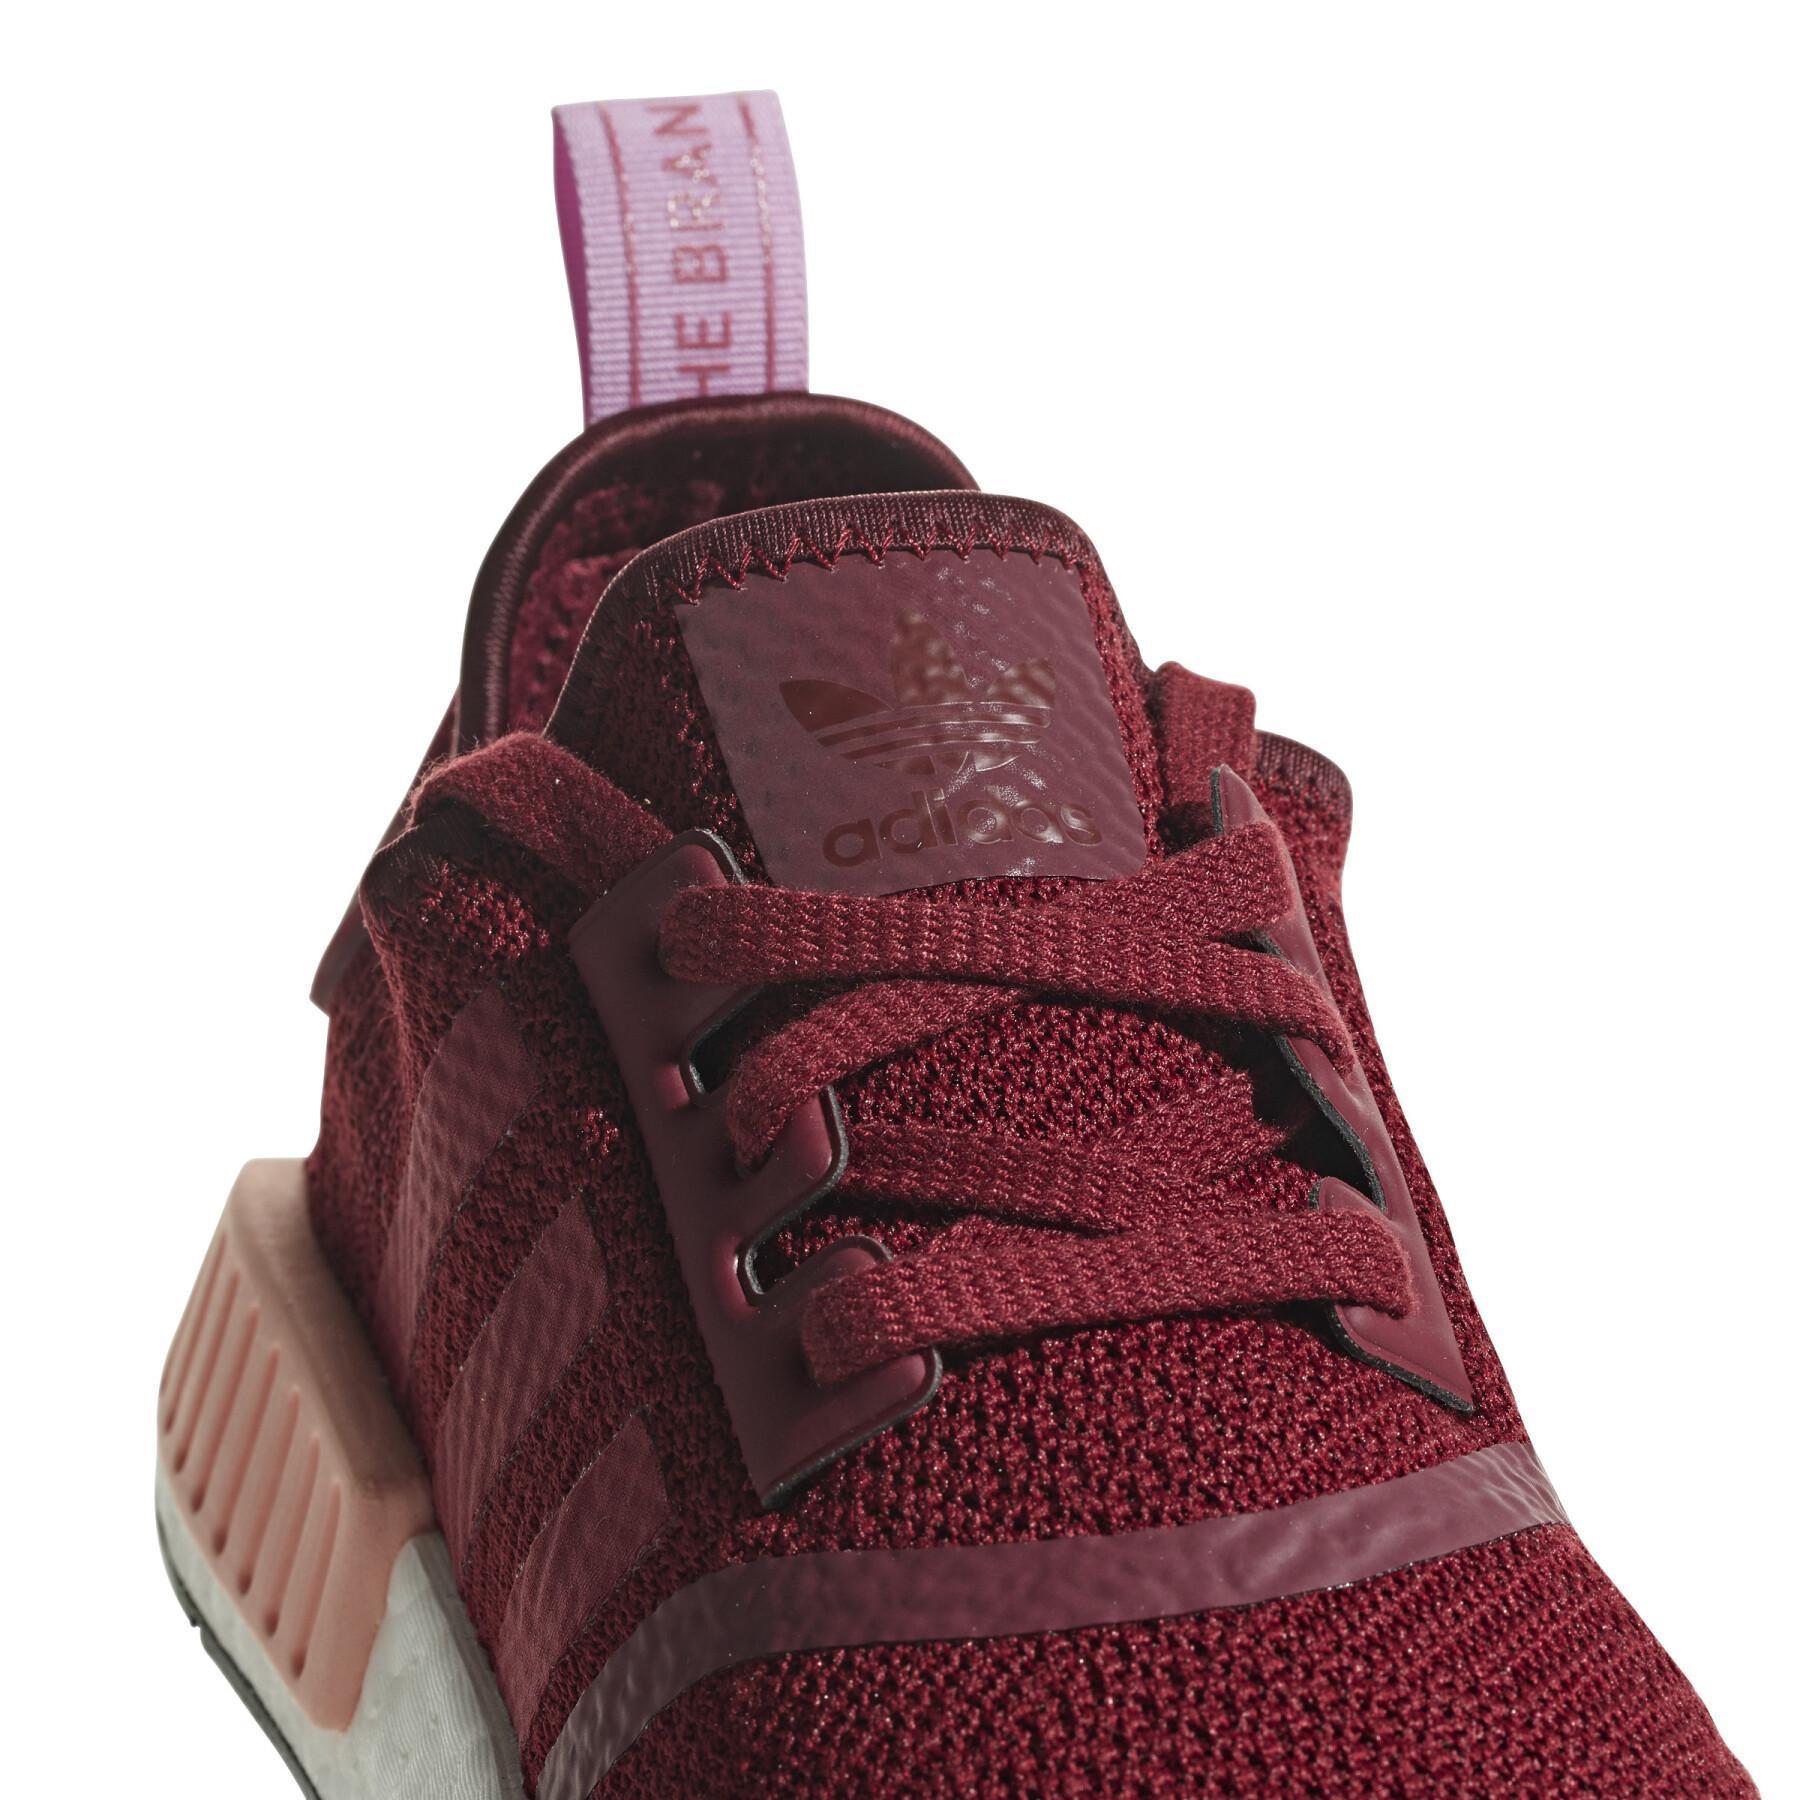 Women's sneakers adidas NMD_R1